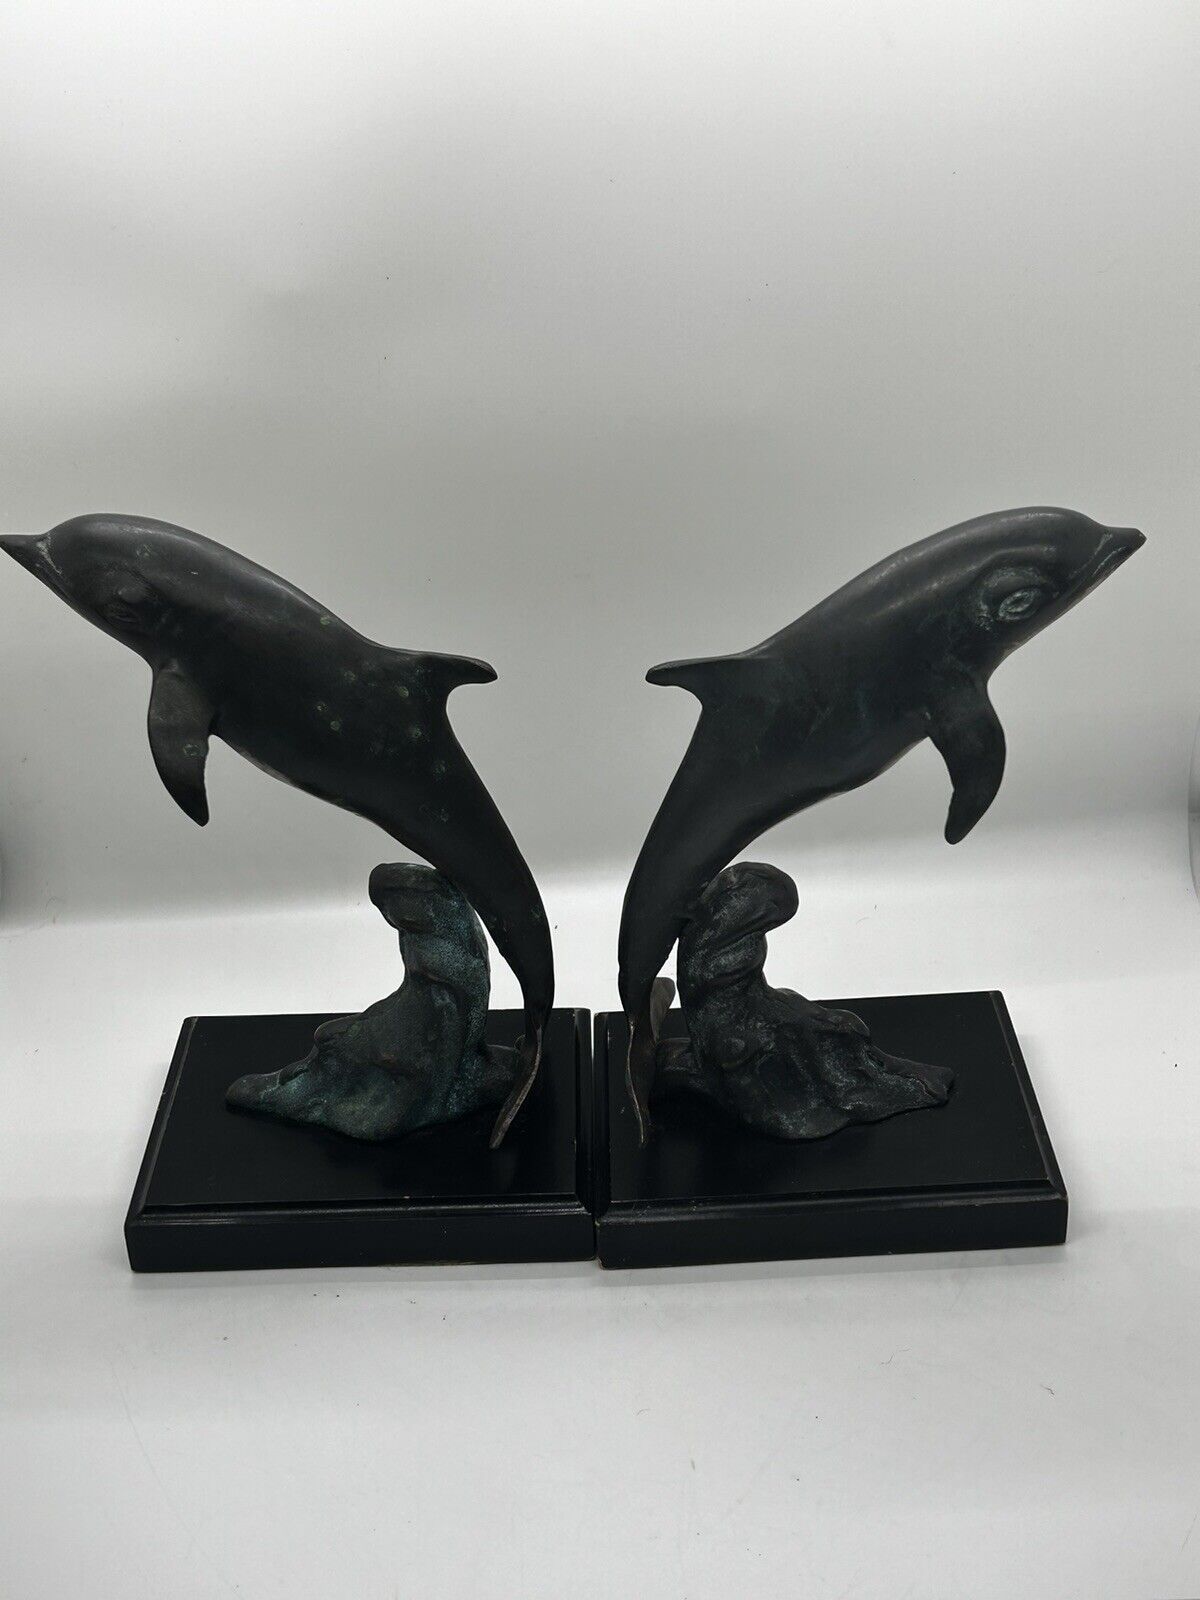 Vntg 5.5”x3.5”x8” San Pacific Int’l SPI Bronze/Brass Wood Base Dolphin Book Ends